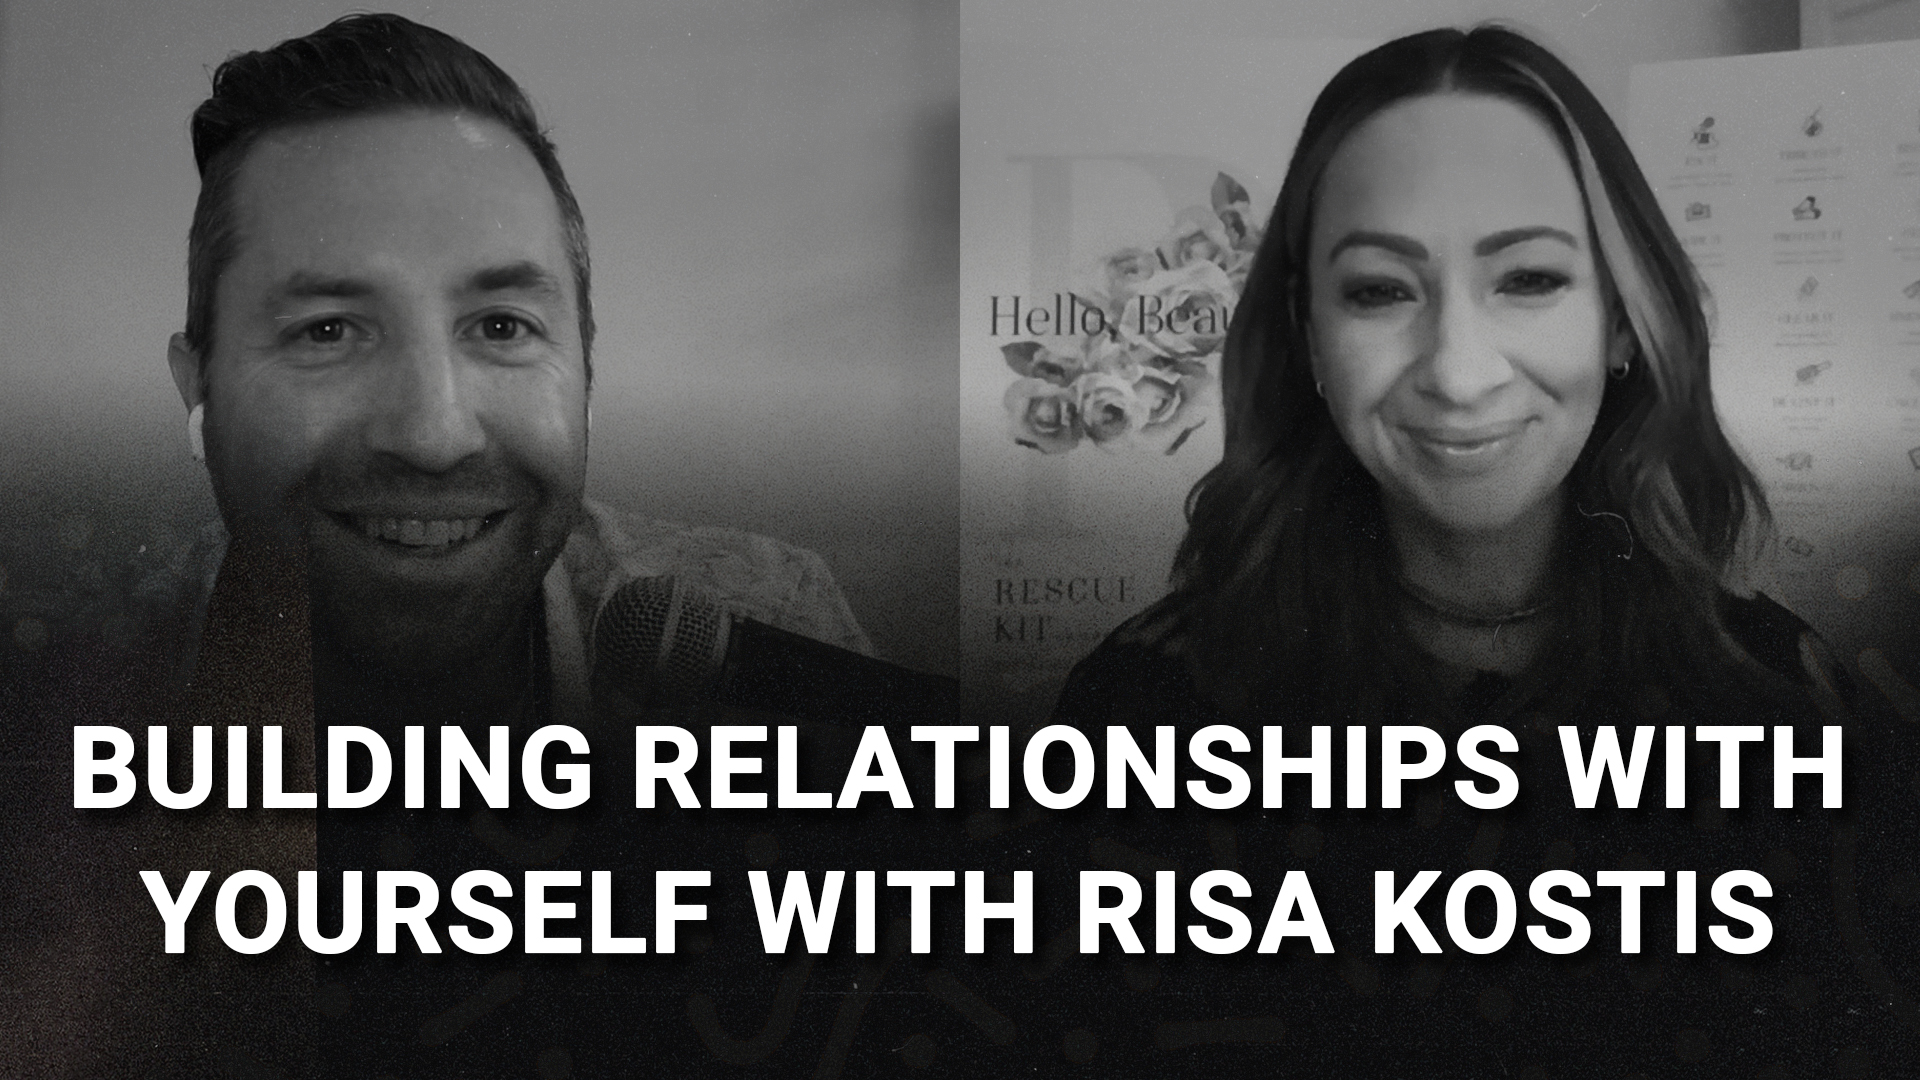 Building Relationships With Yourself With Risa Kostis